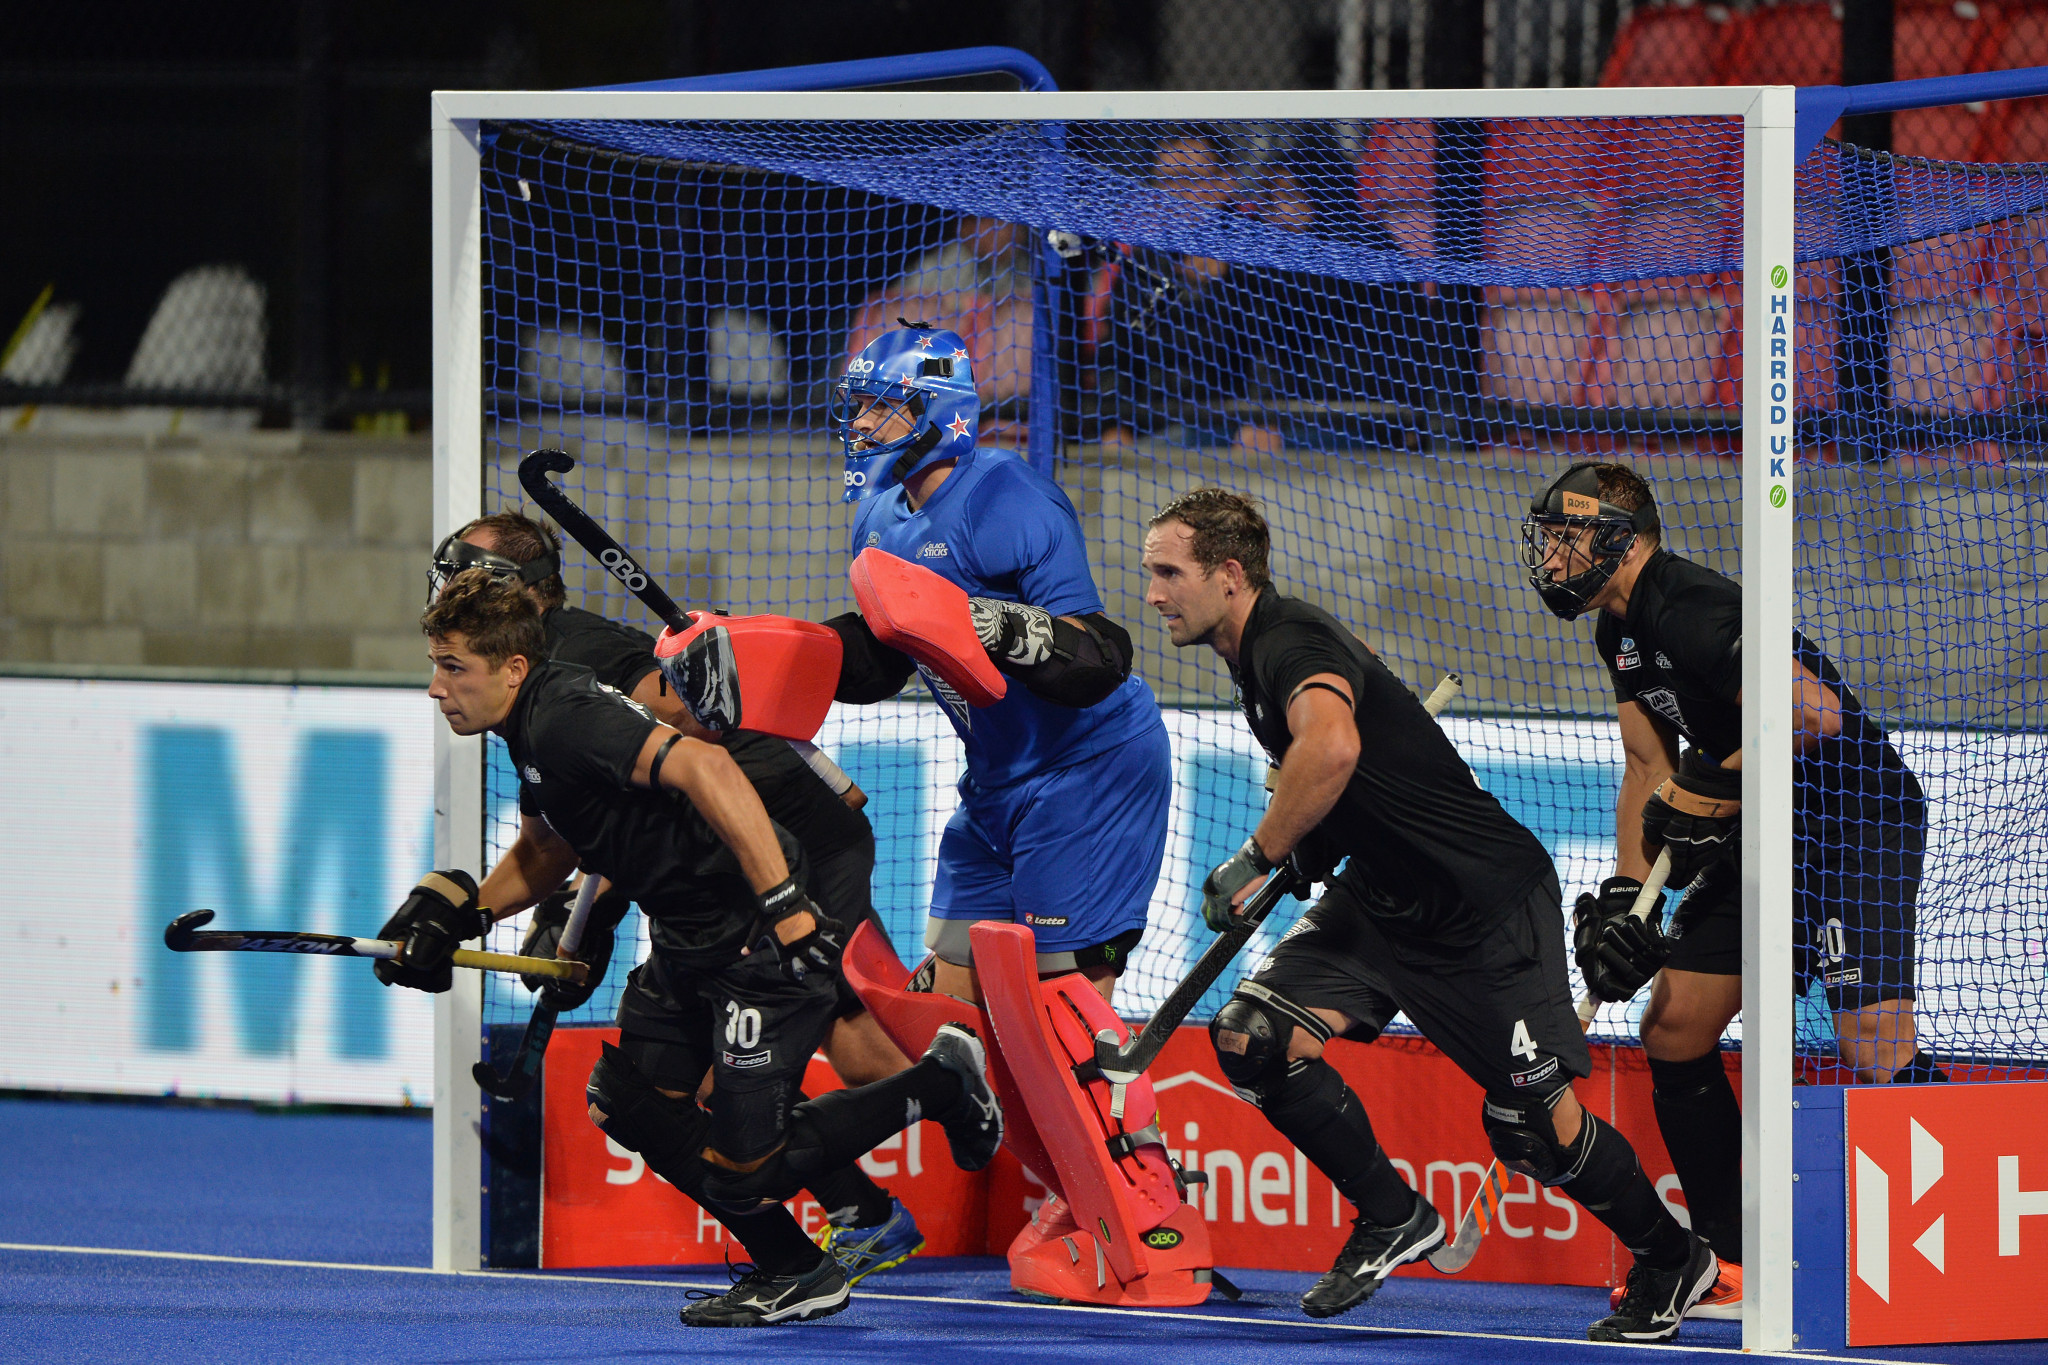 New Zealand's men picked up their first win of the FIH Pro League season ©Getty Images